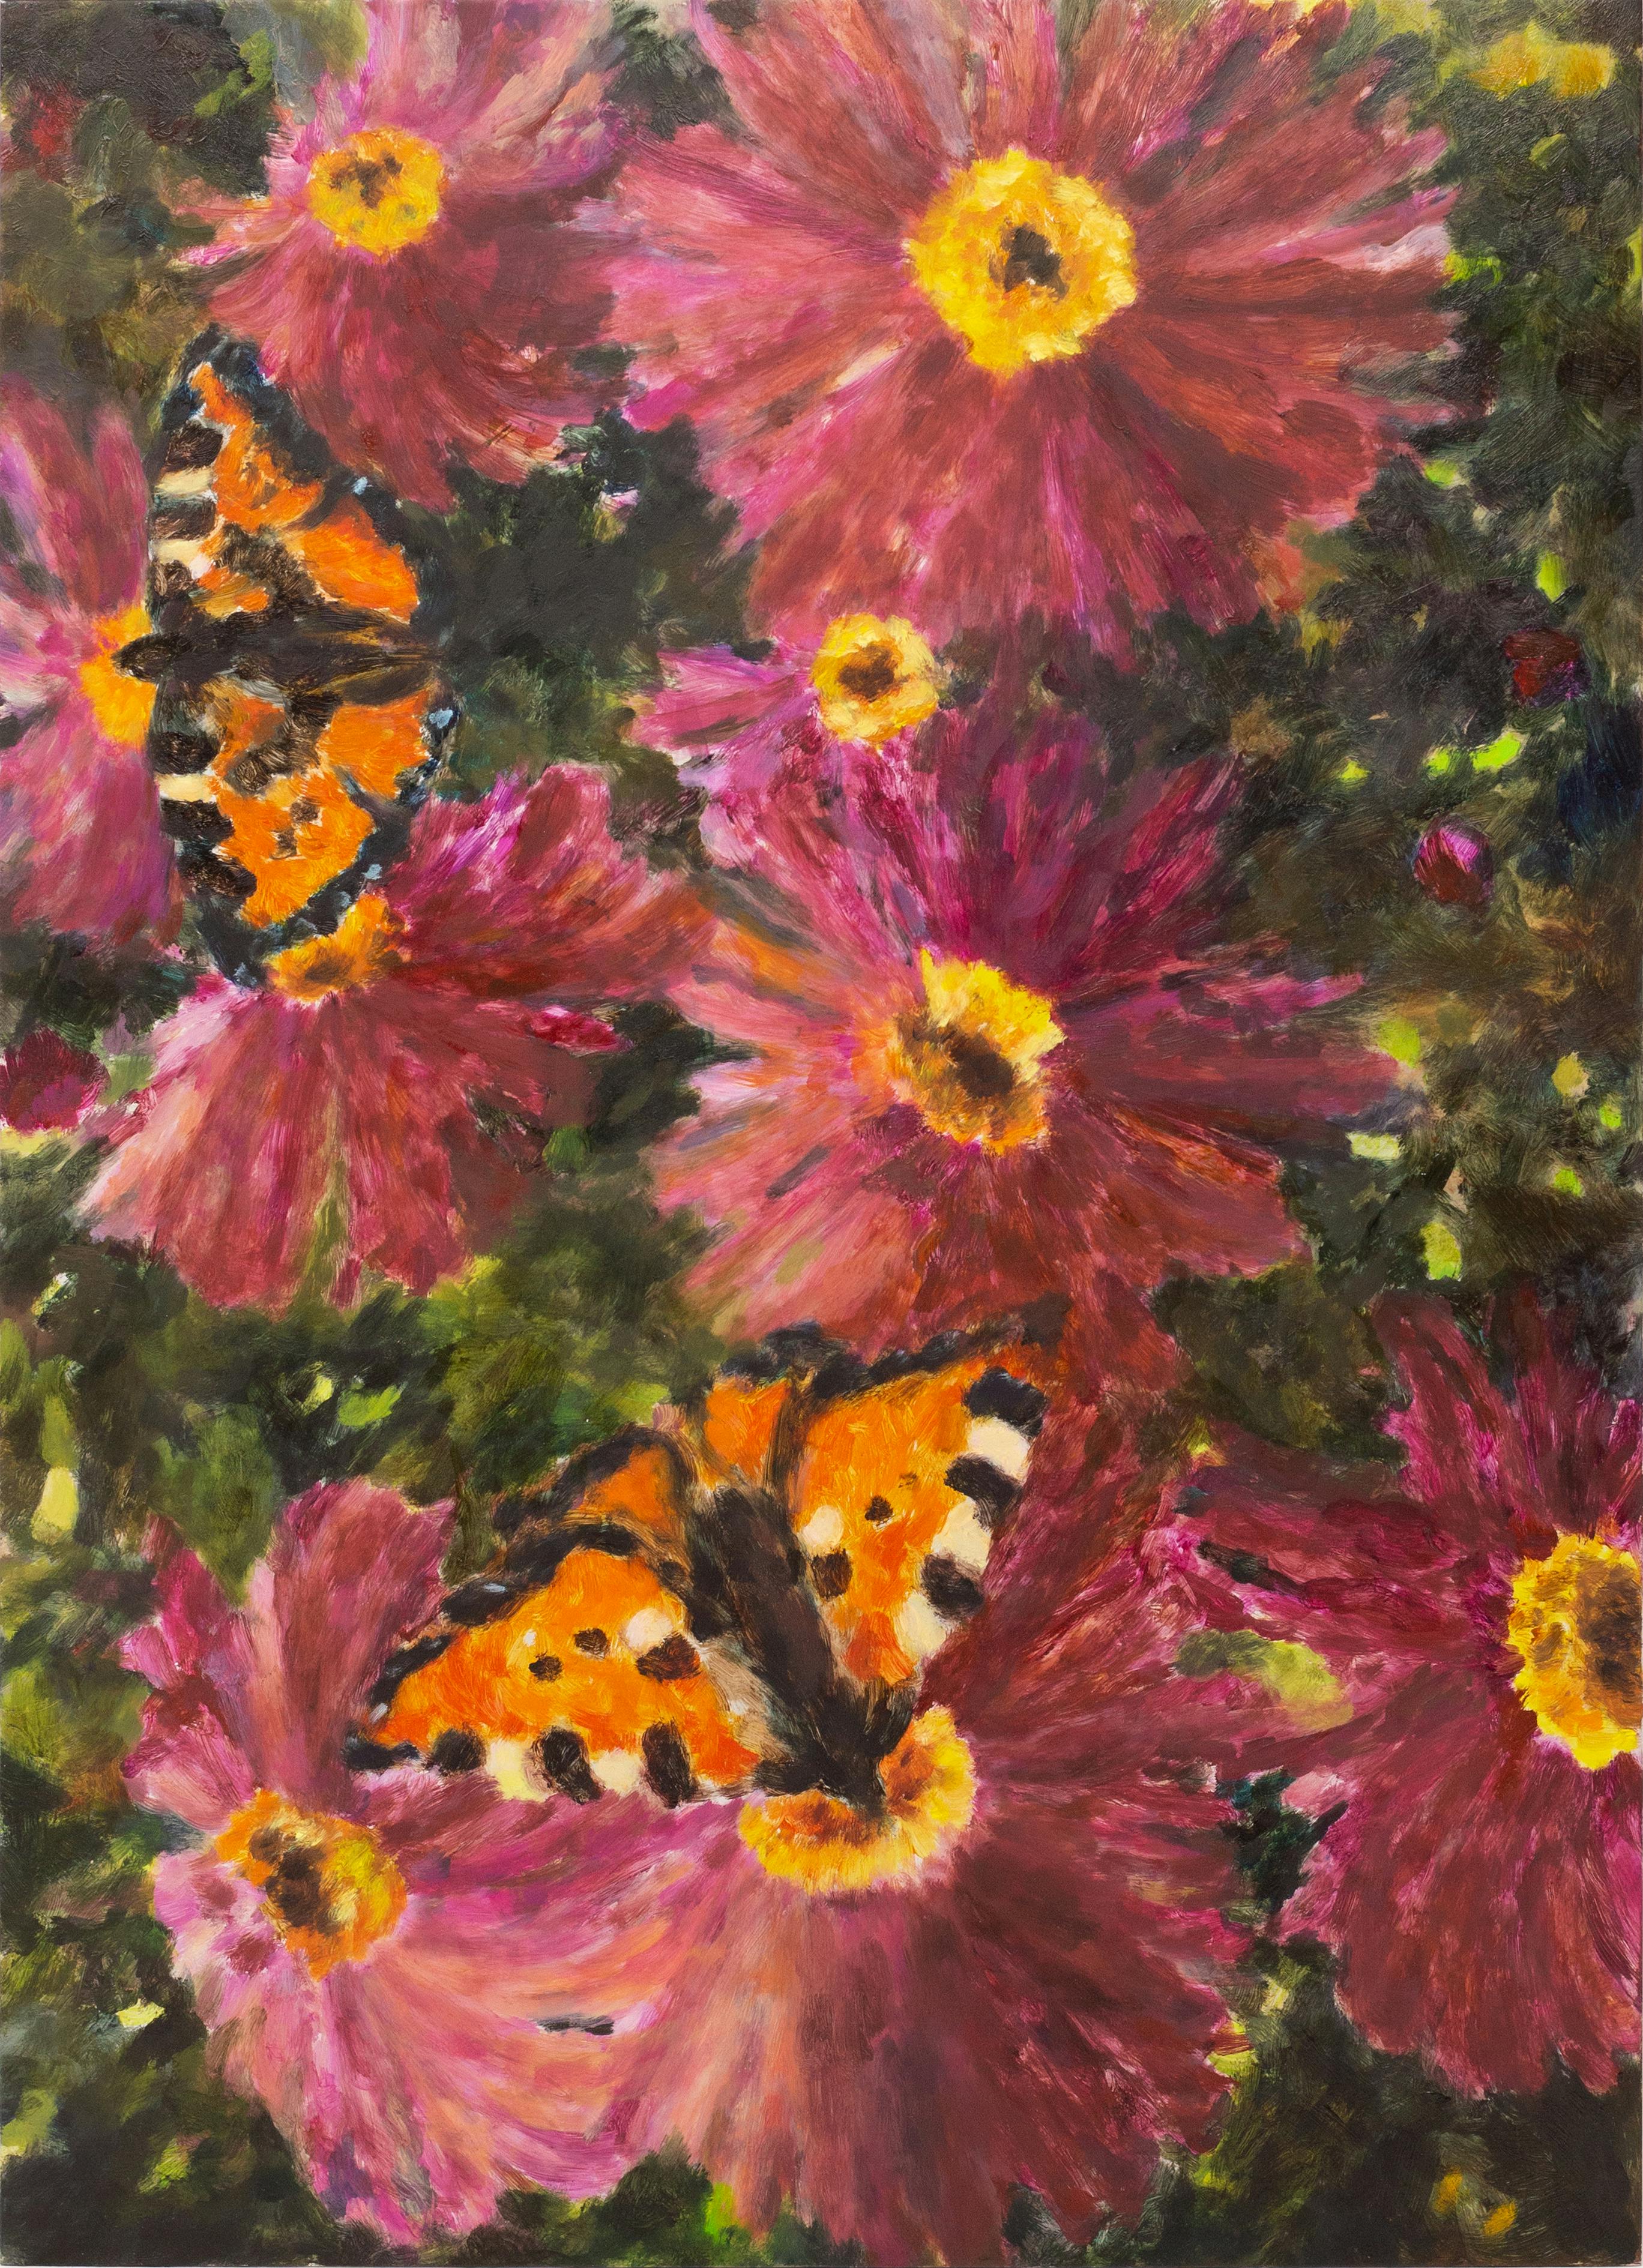 Butterflies and Asters, 2022. Oil on aluminium, 40 x 30cm